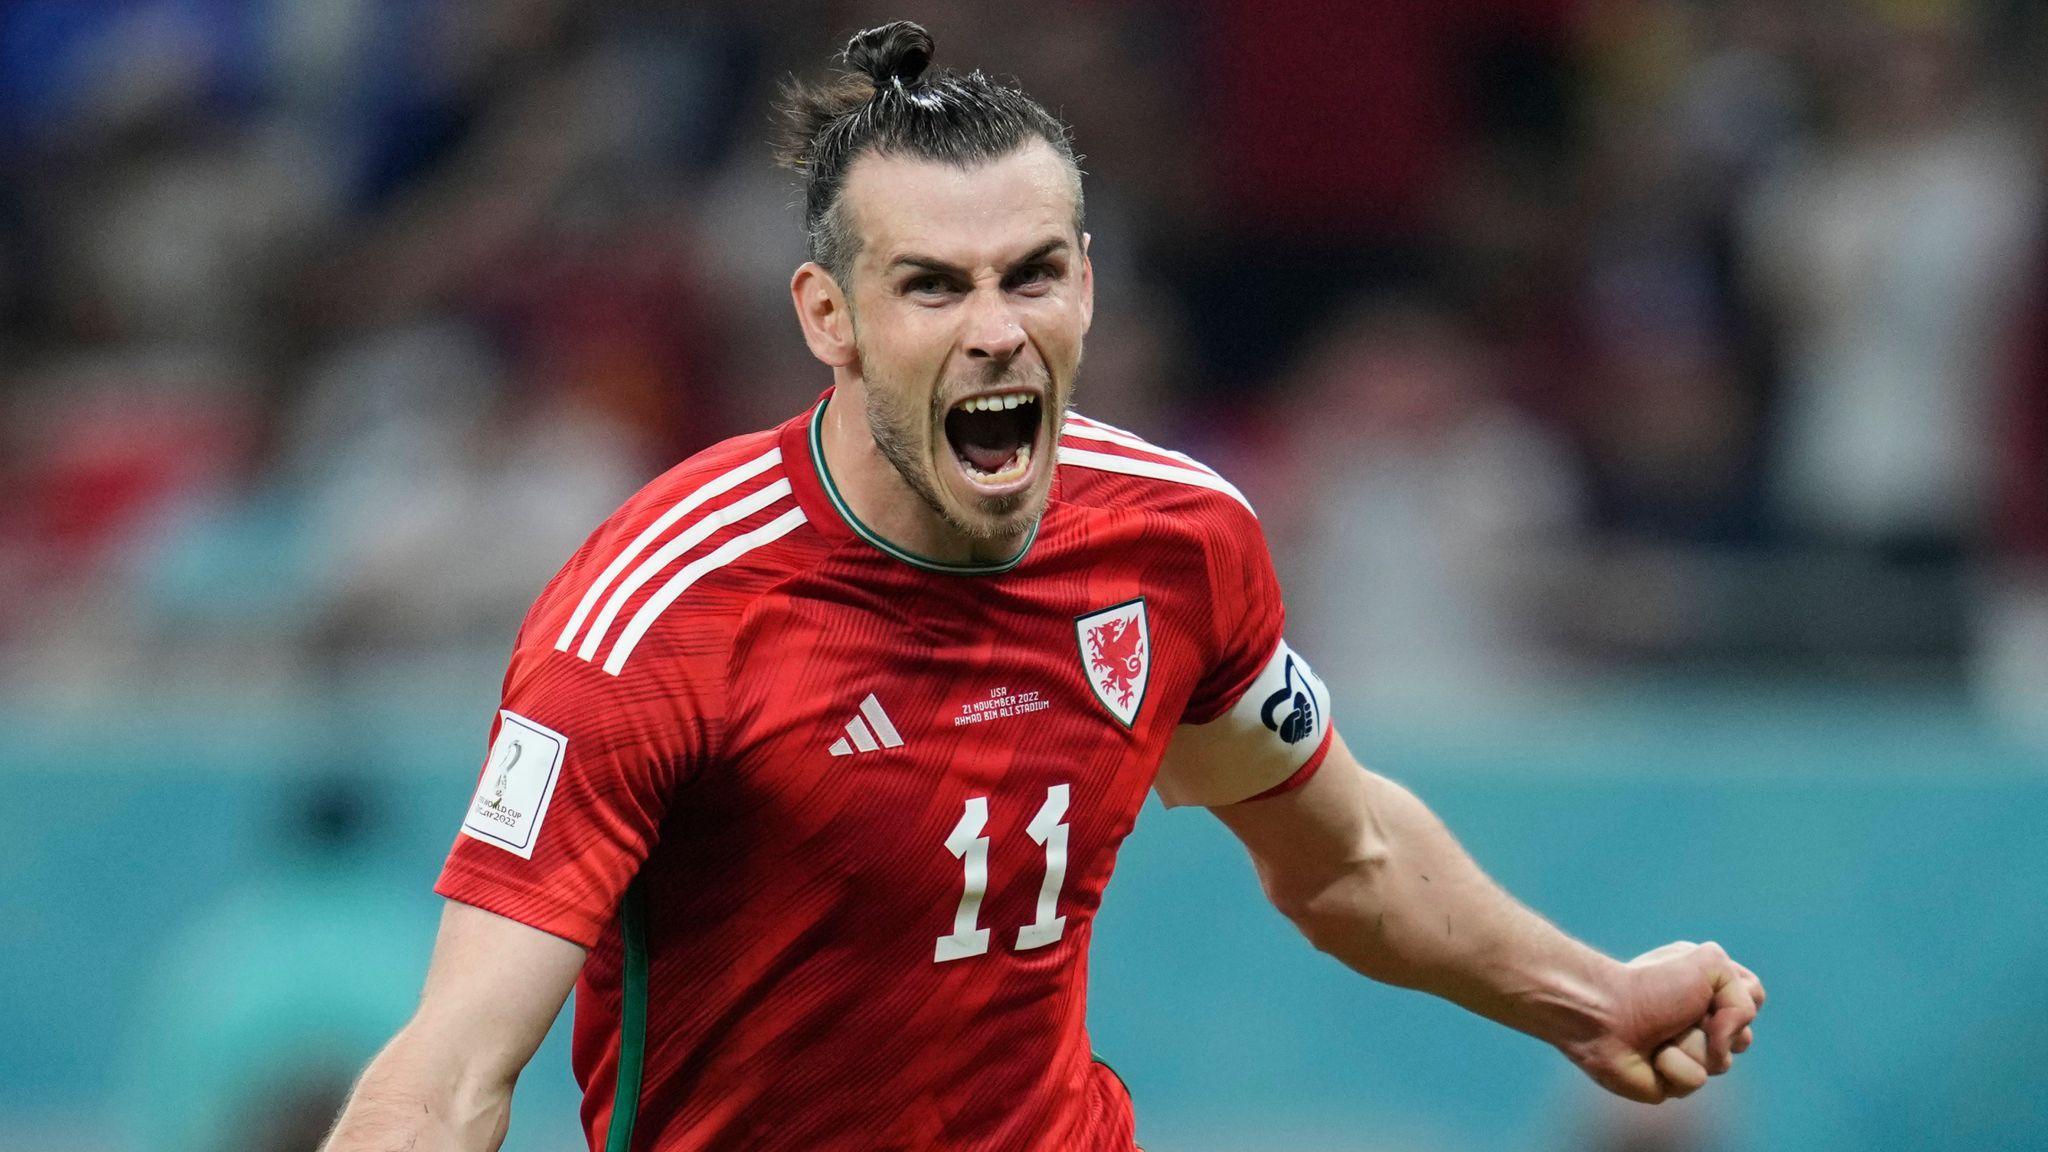 Gareth Bale announces retirement from professional football_40.1